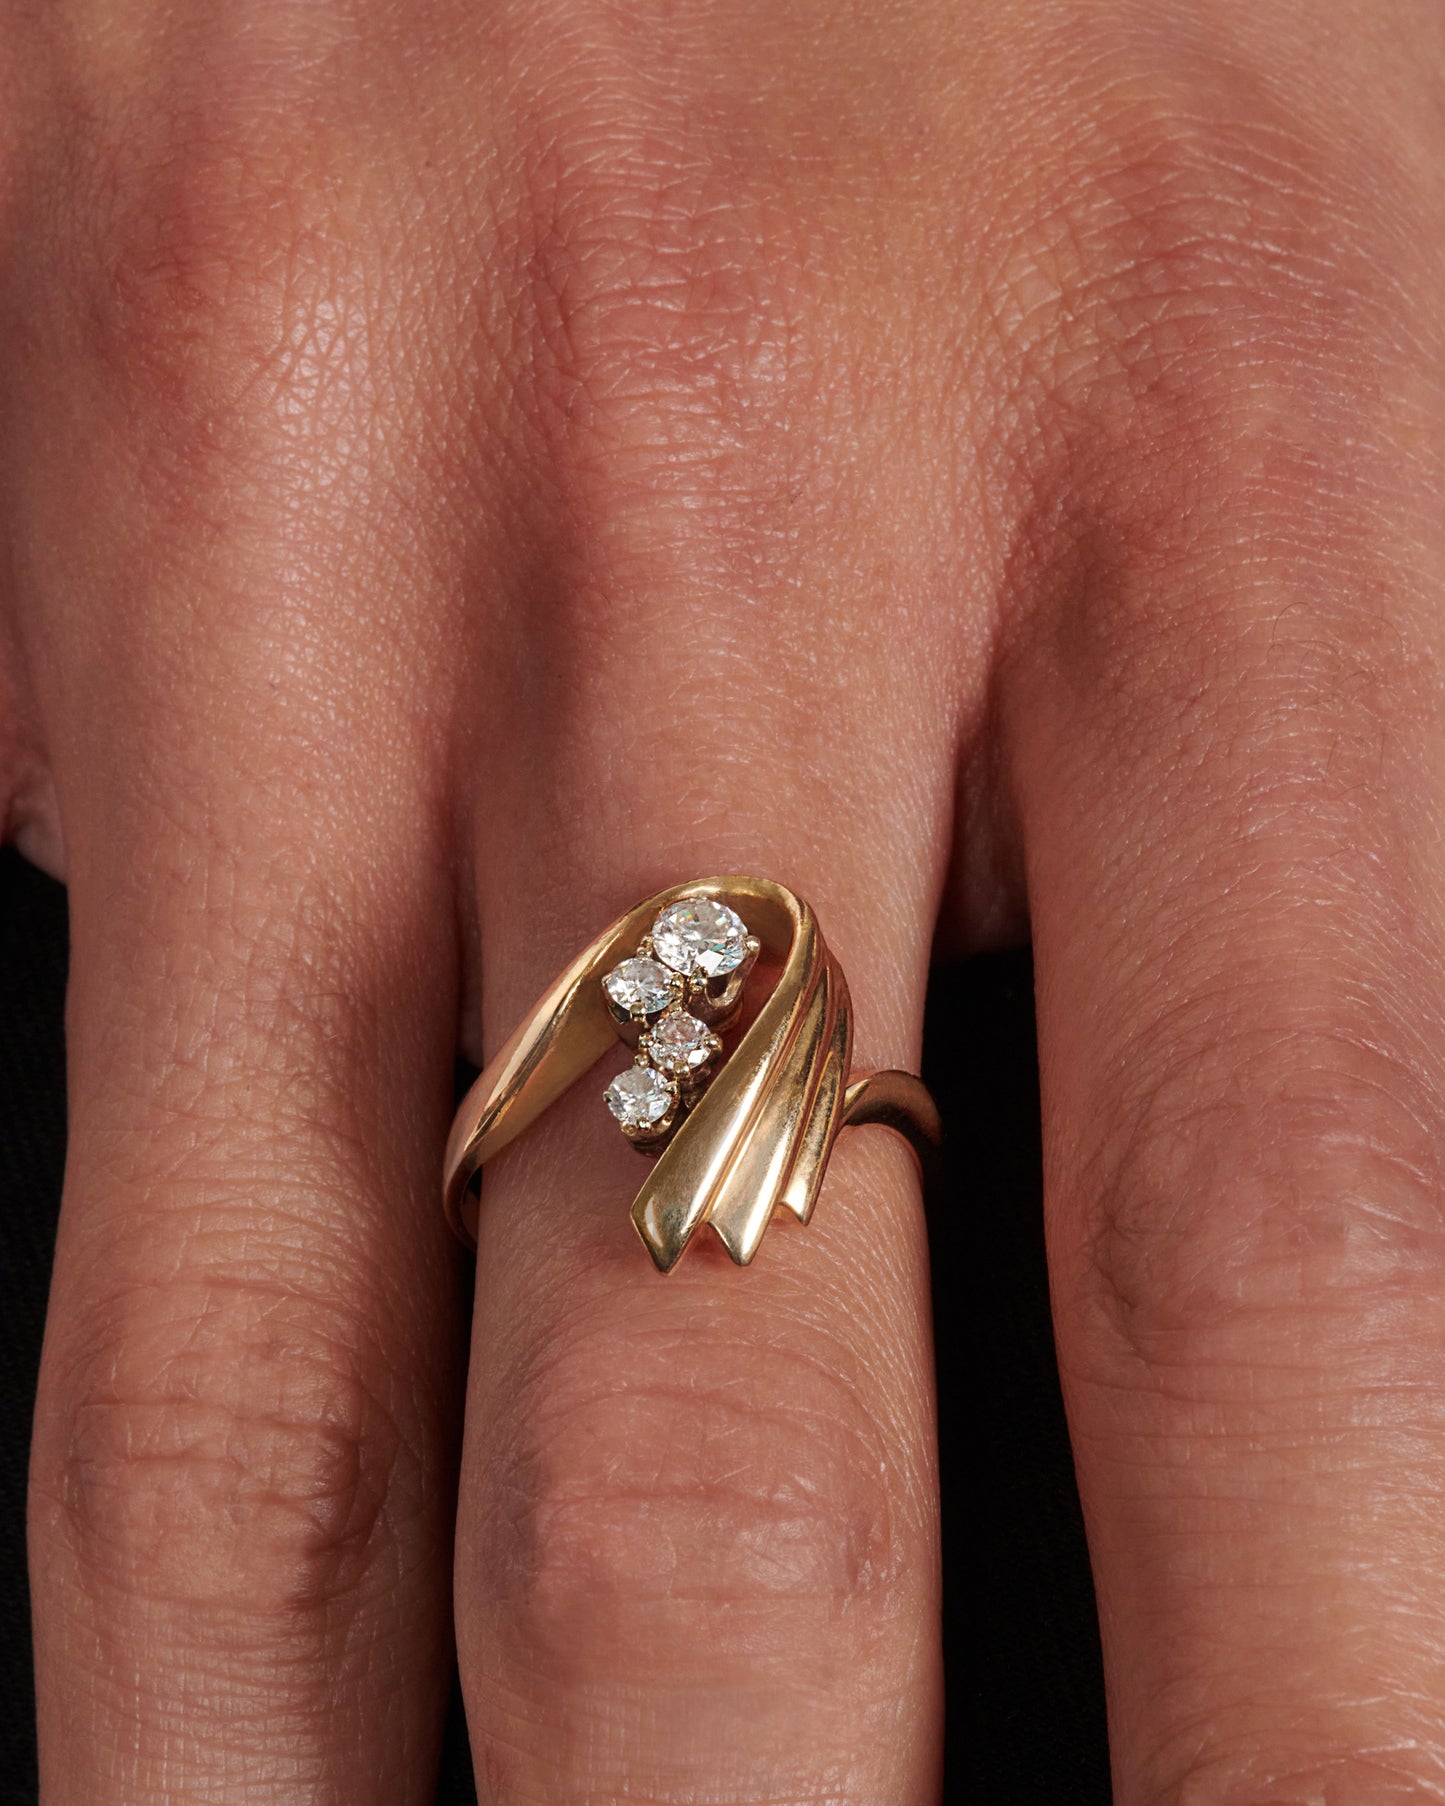 A vintage 14k gold U-shaped ring with four round diamonds resting in the center